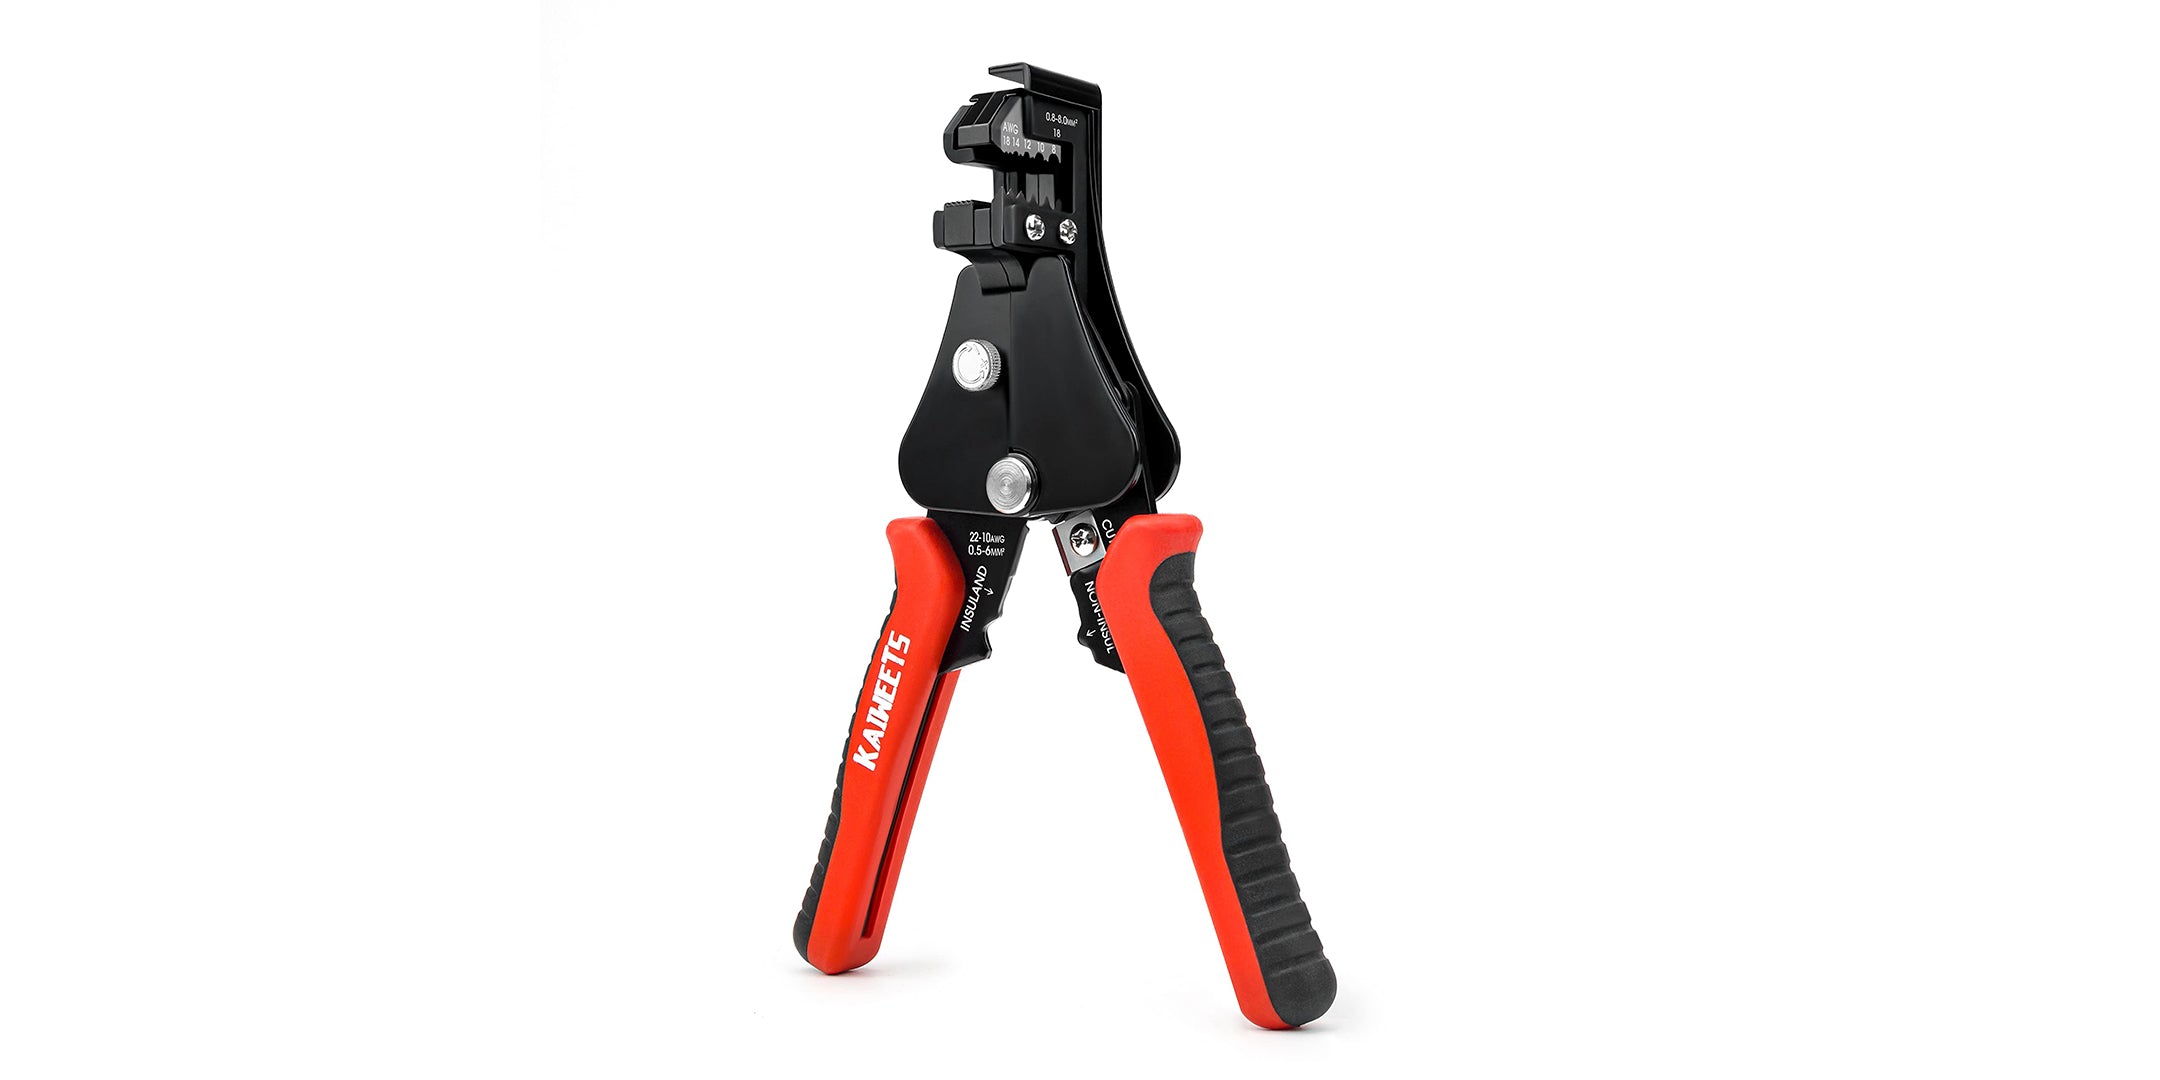 KAIWEETS Self Adjusting Wire Stripper - 3 in 1 Heavy Duty Automatic Wire  Stripping Tool | 10-24 AWG Wire Cutter for Electrical Cable Cutting,  Crimping